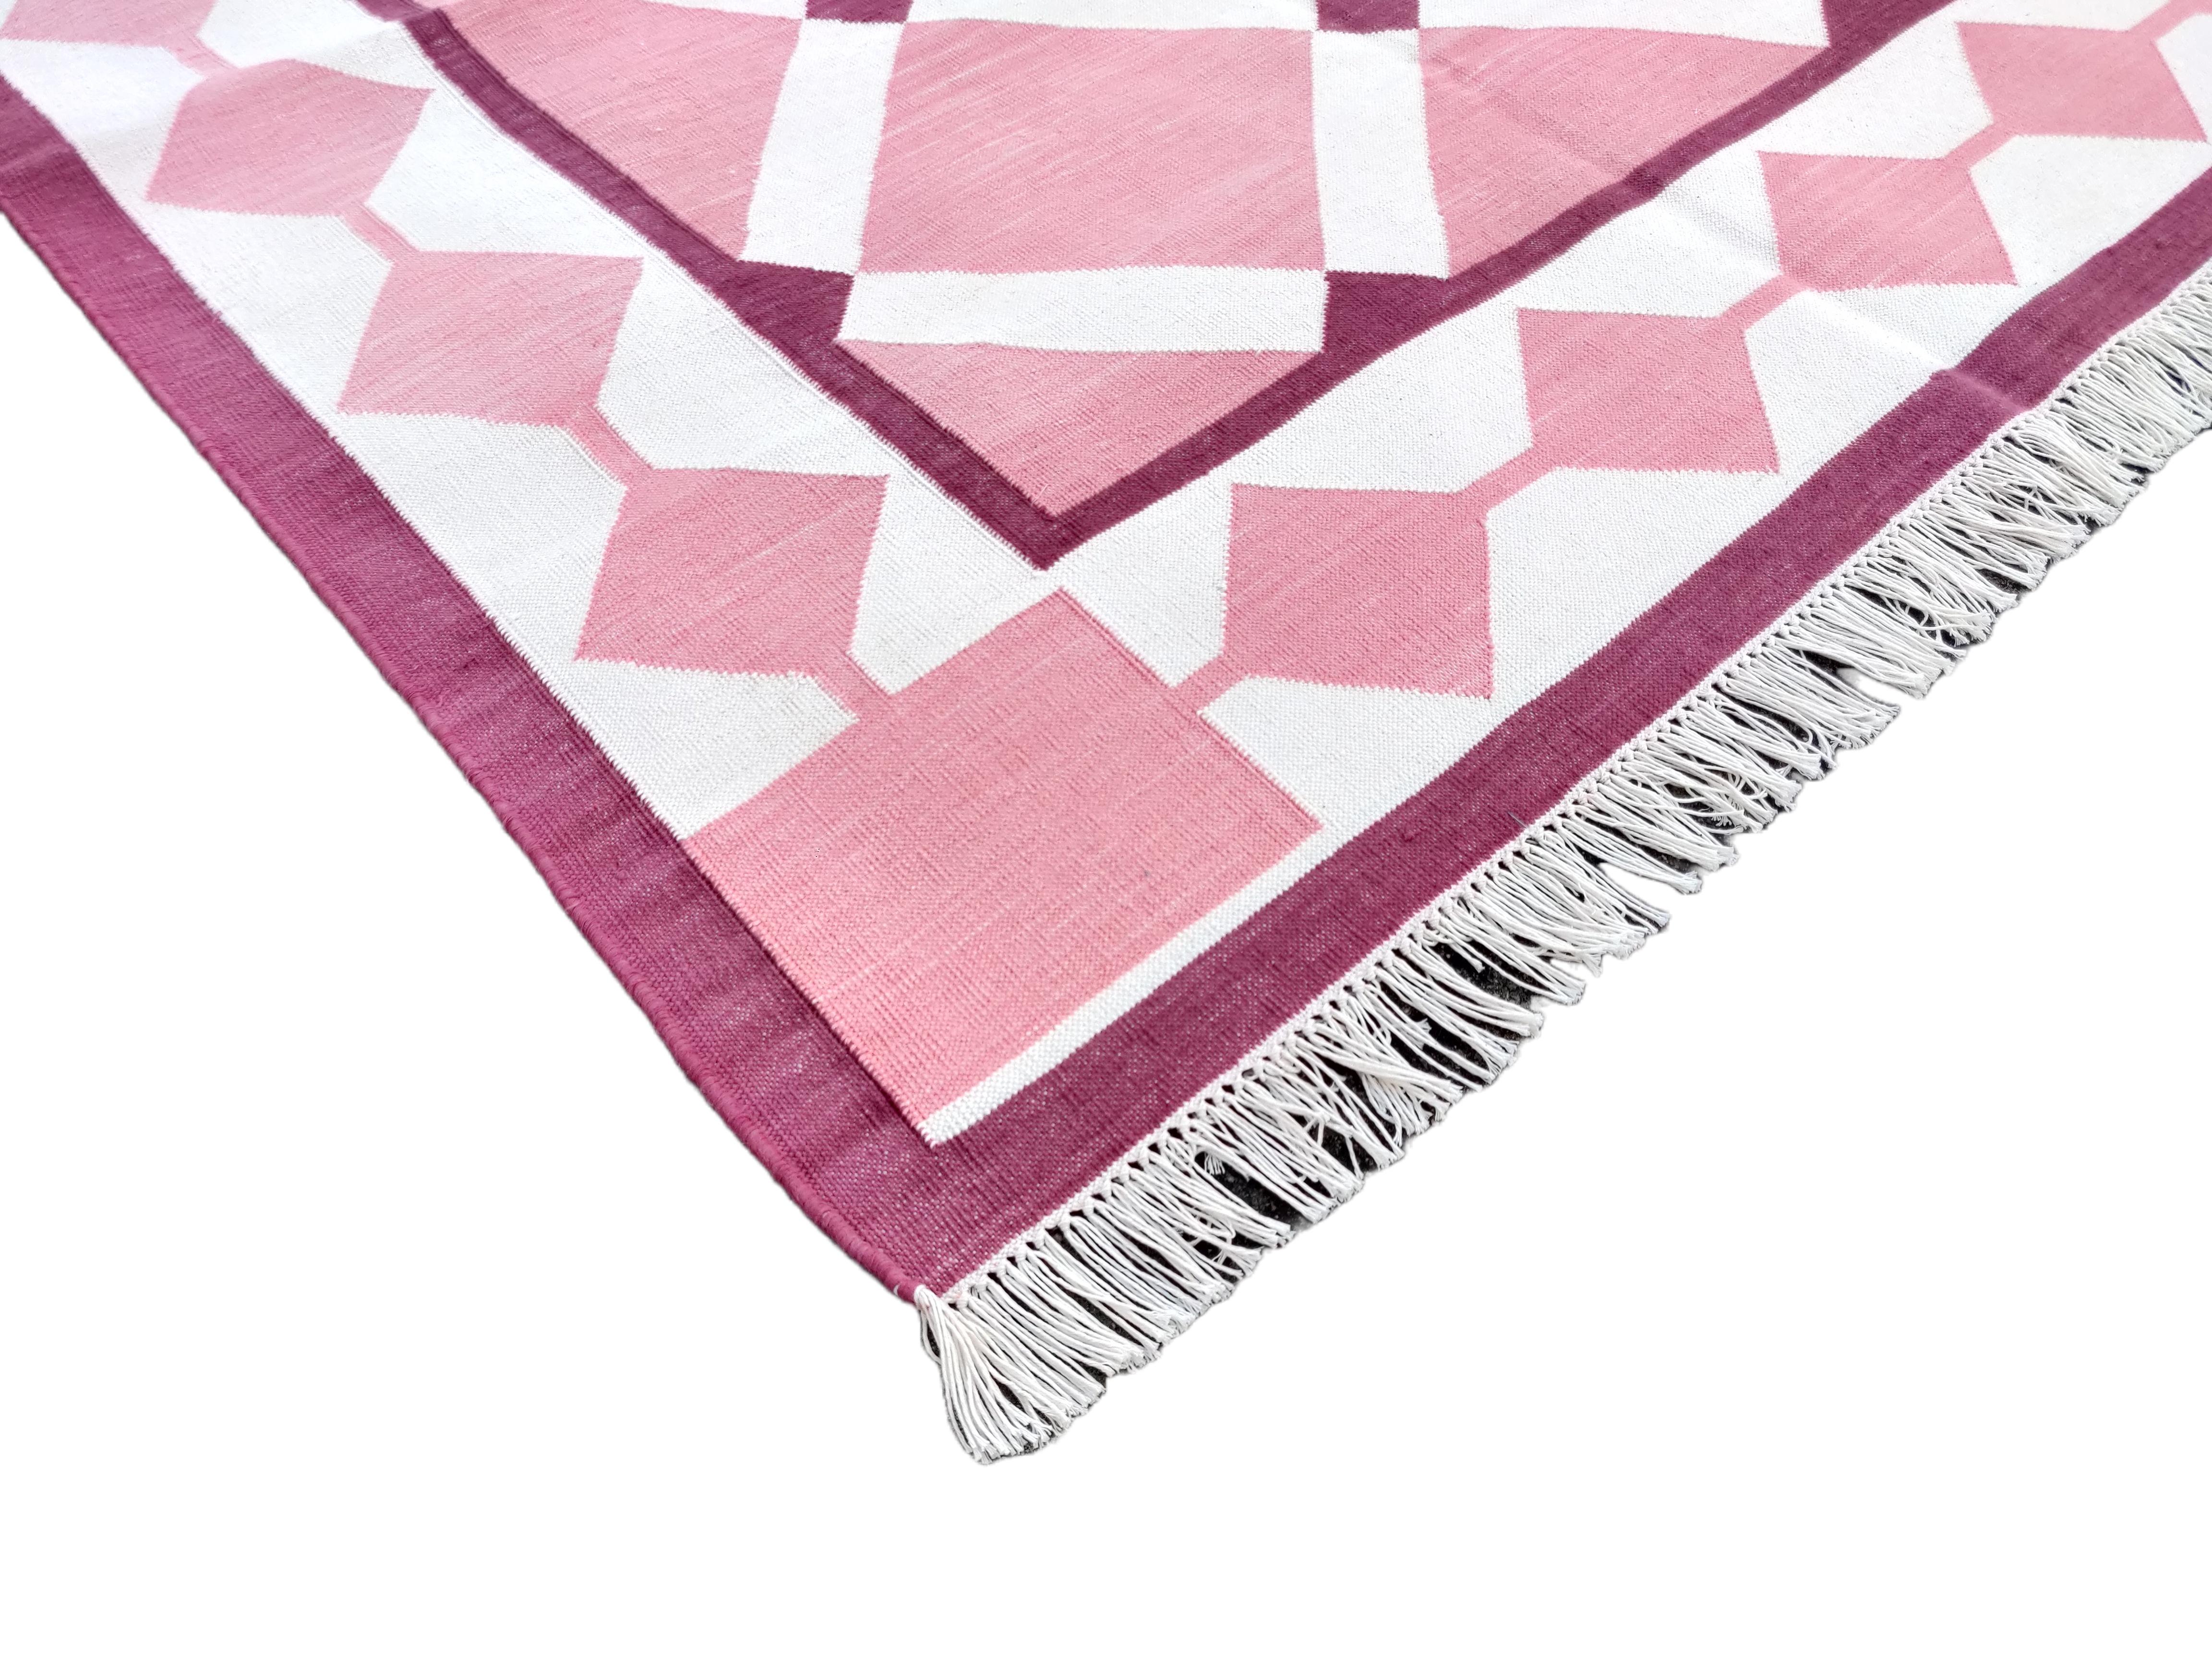 Hand-Woven Handmade Cotton Area Flat Weave Rug, 8x10 Pink Indian Star Geometric Dhurrie Rug For Sale